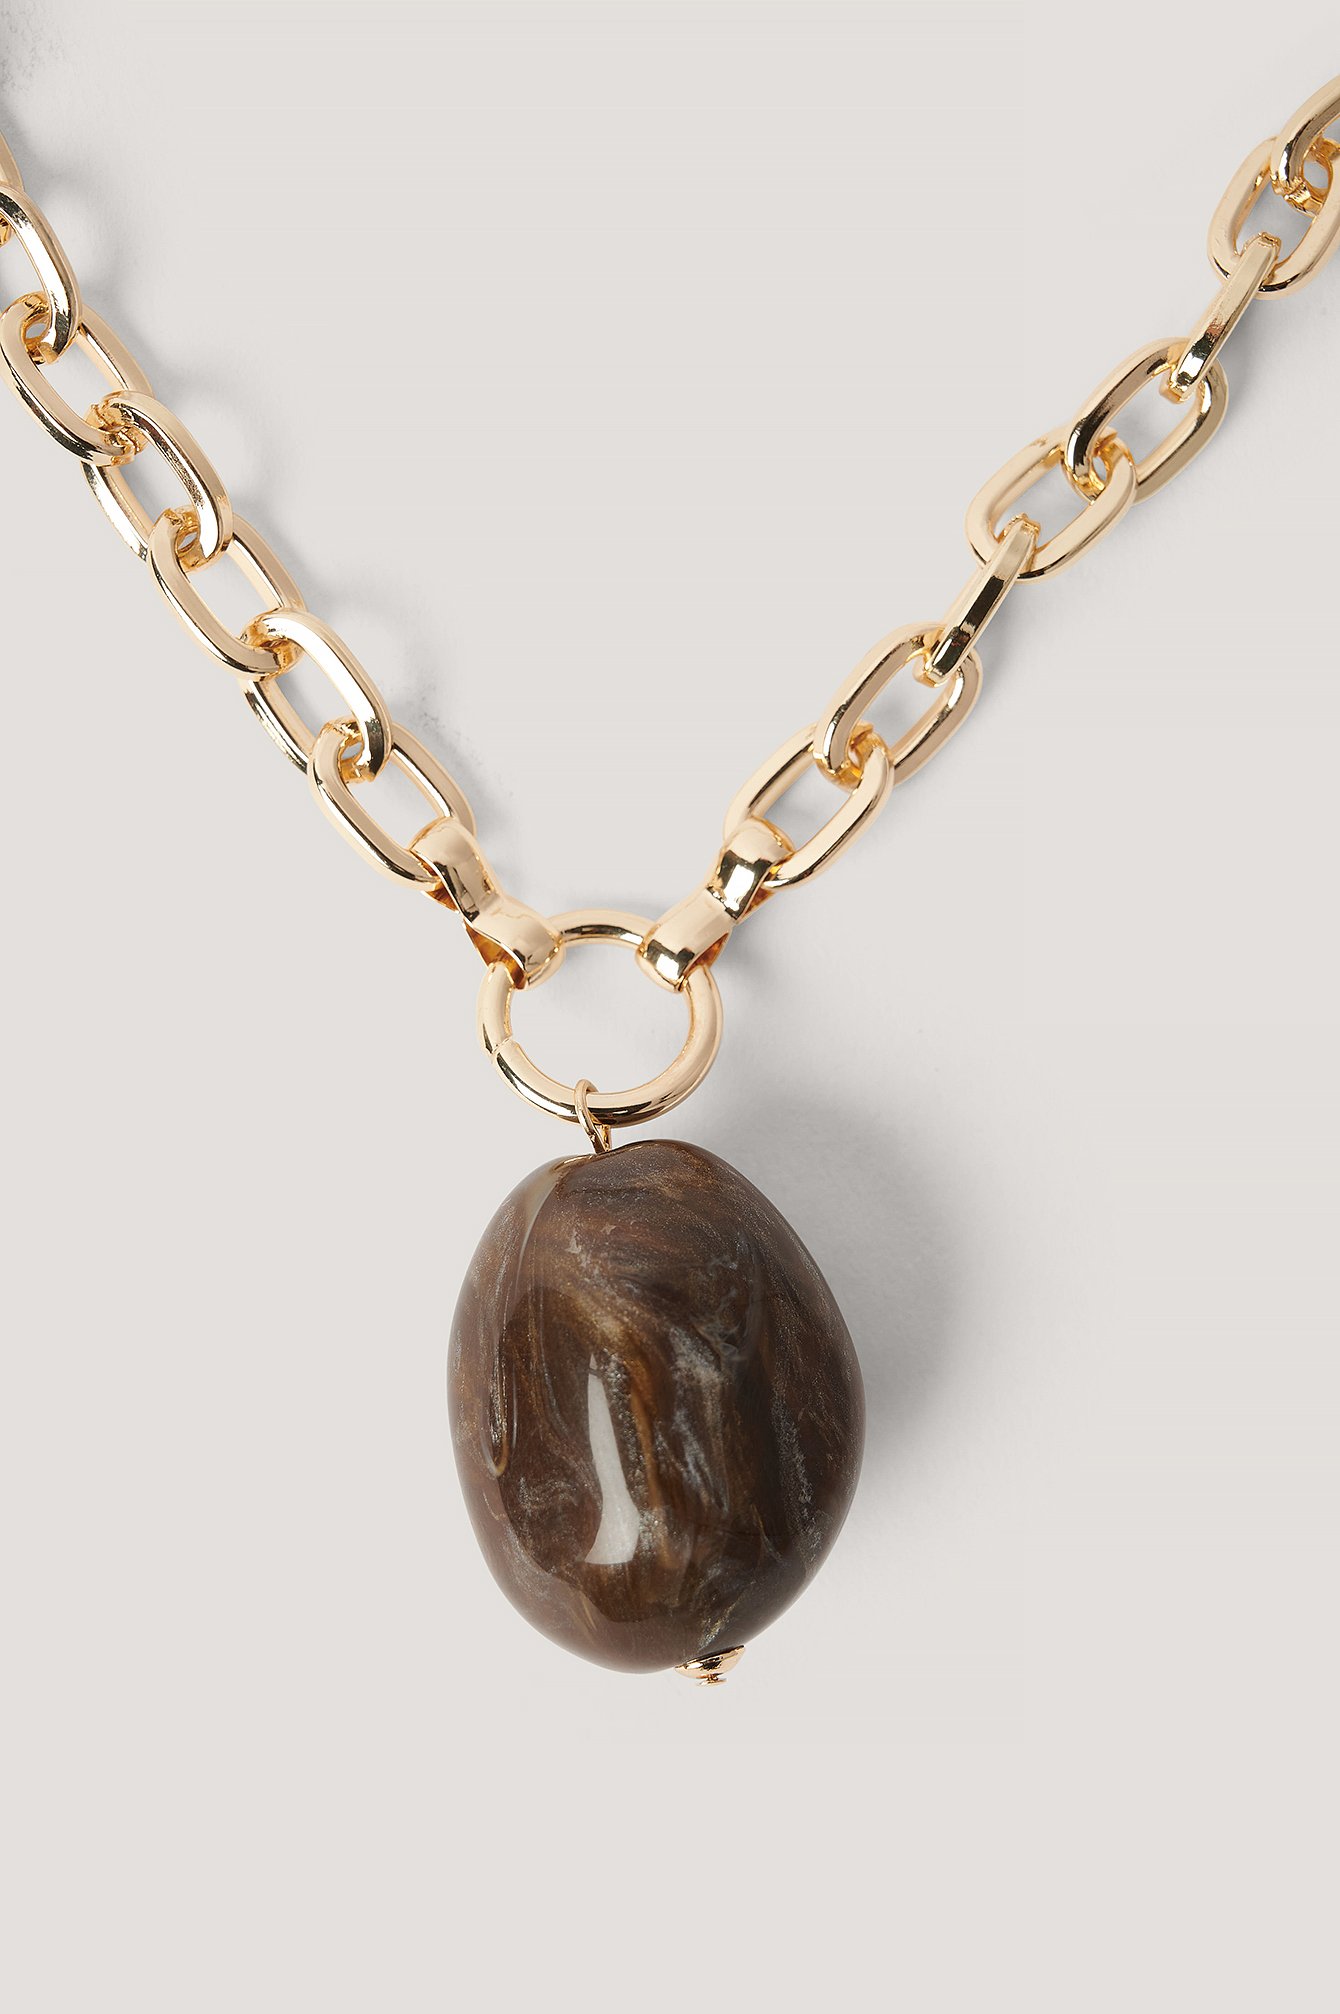 Gold Big Stone Chain Necklace